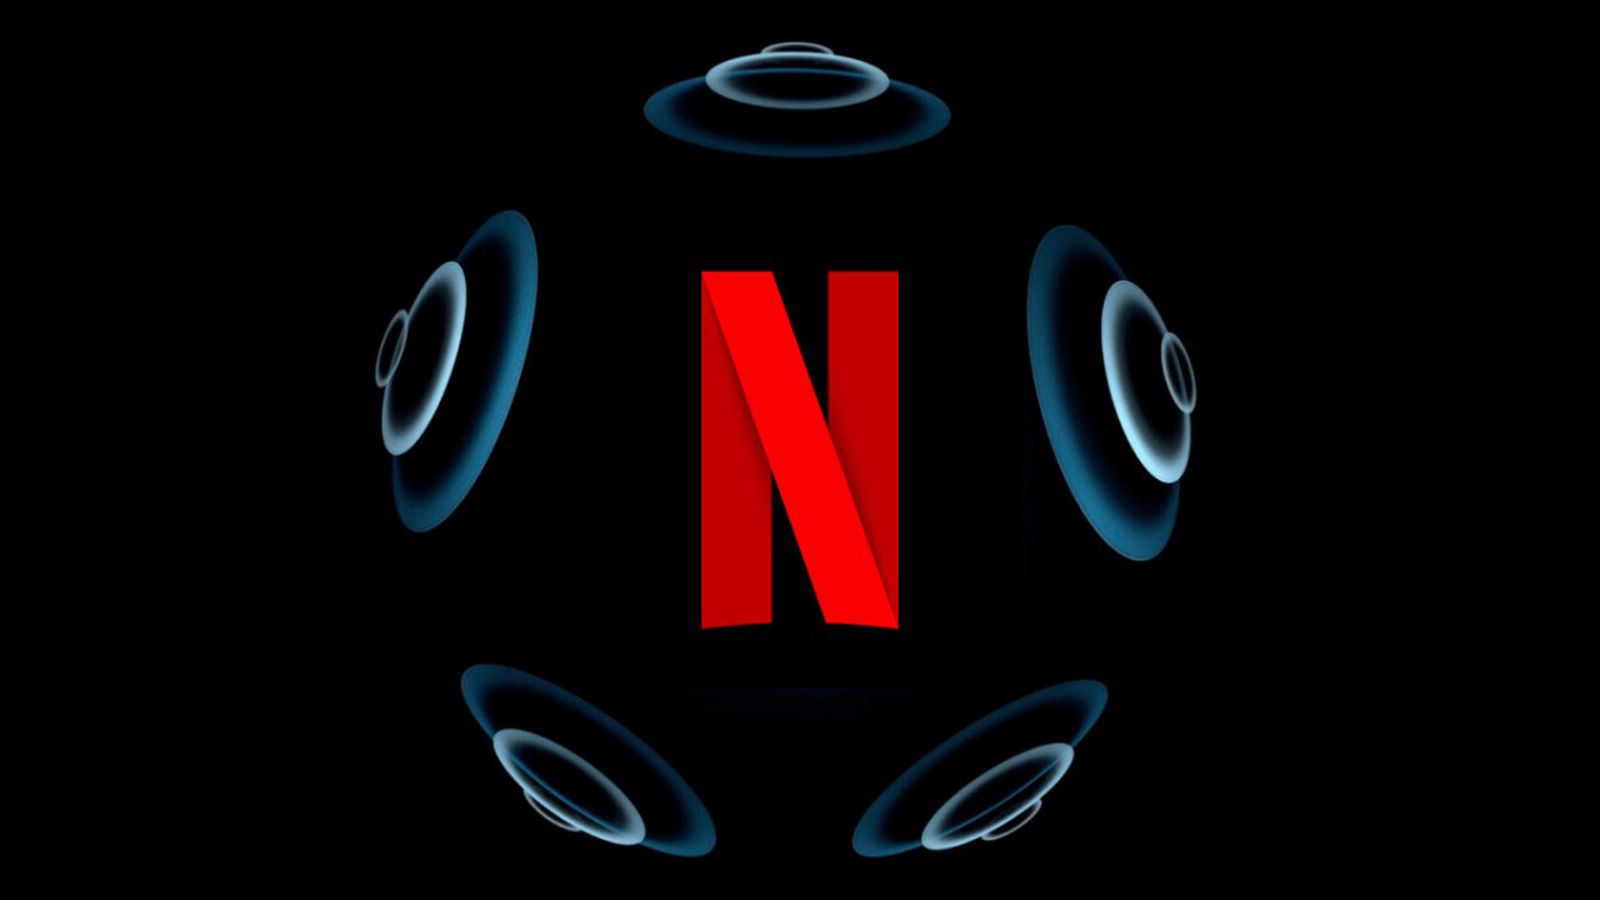 Netflix Allegedly Testing Spatial Audio Support for AirPods Pro and AirPods Max - Mac Rumors